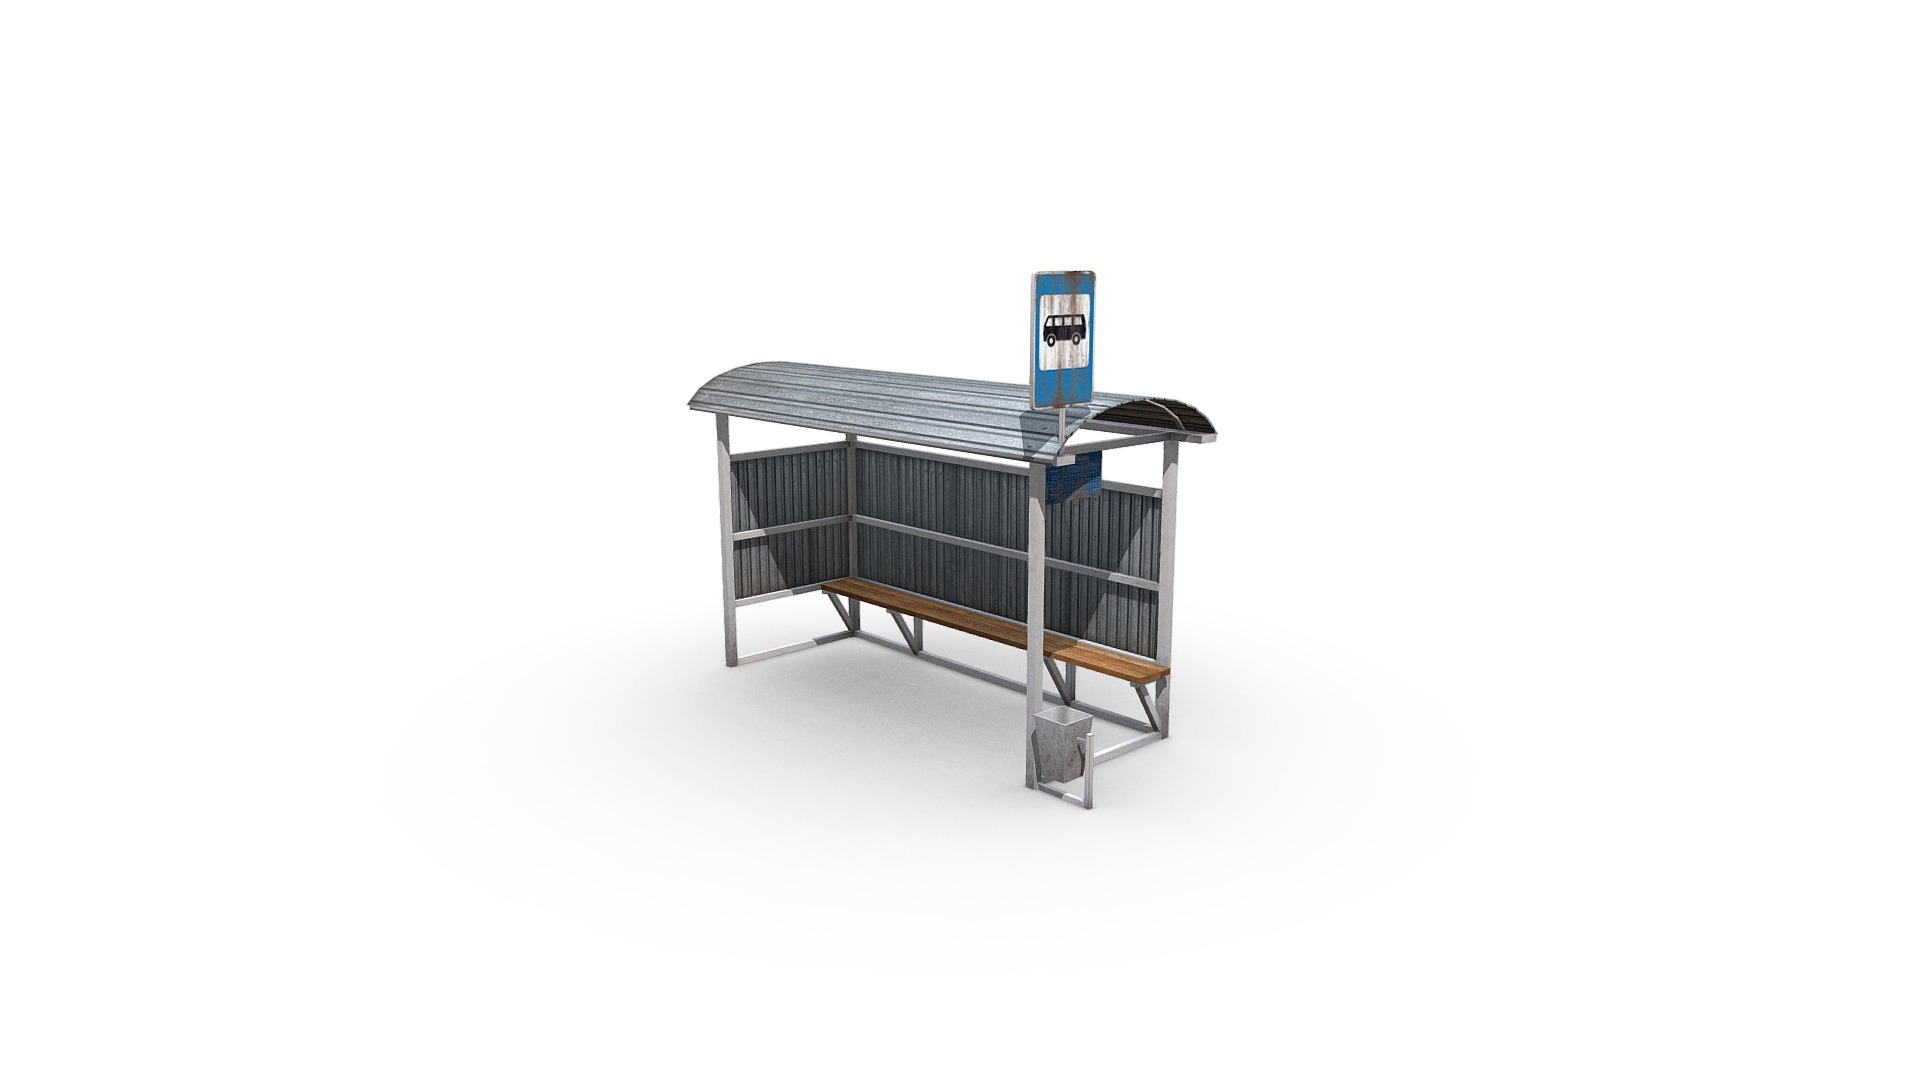 3D model Busstop - This is a 3D model of the Busstop. The 3D model is about a small metal bench.